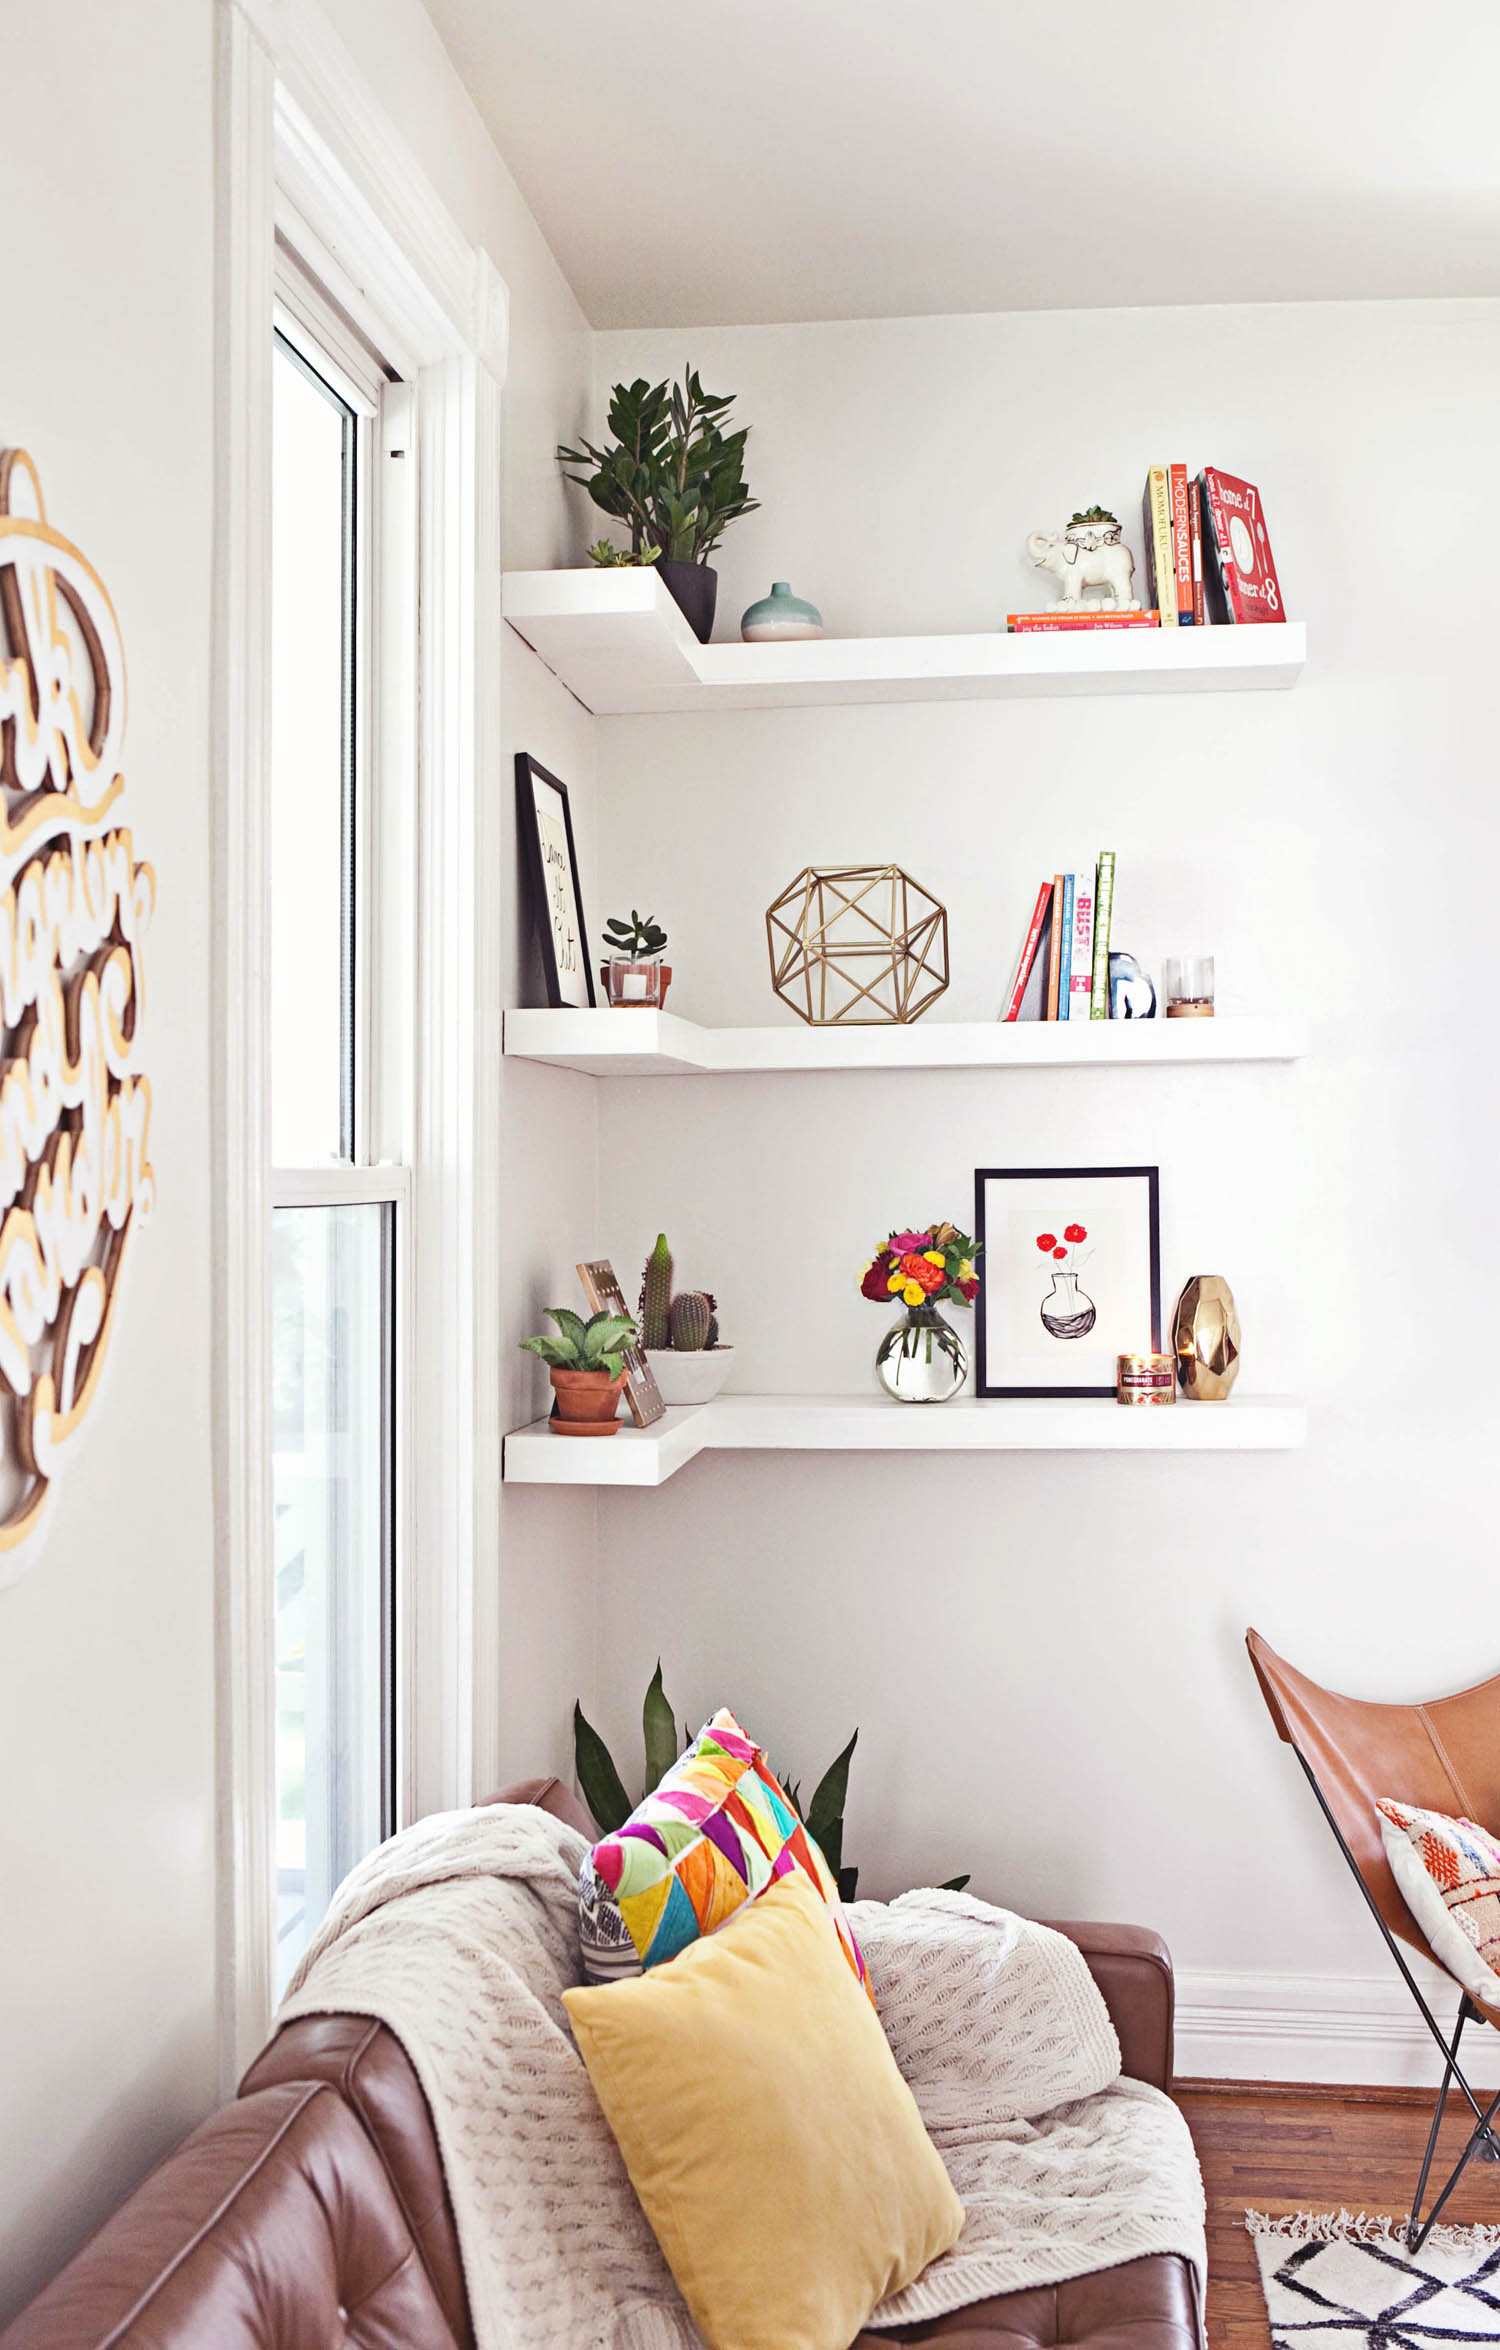 Three white corner-mounted floating shelves hold a small plant, pictures, and a uniquely shaped decor piece.